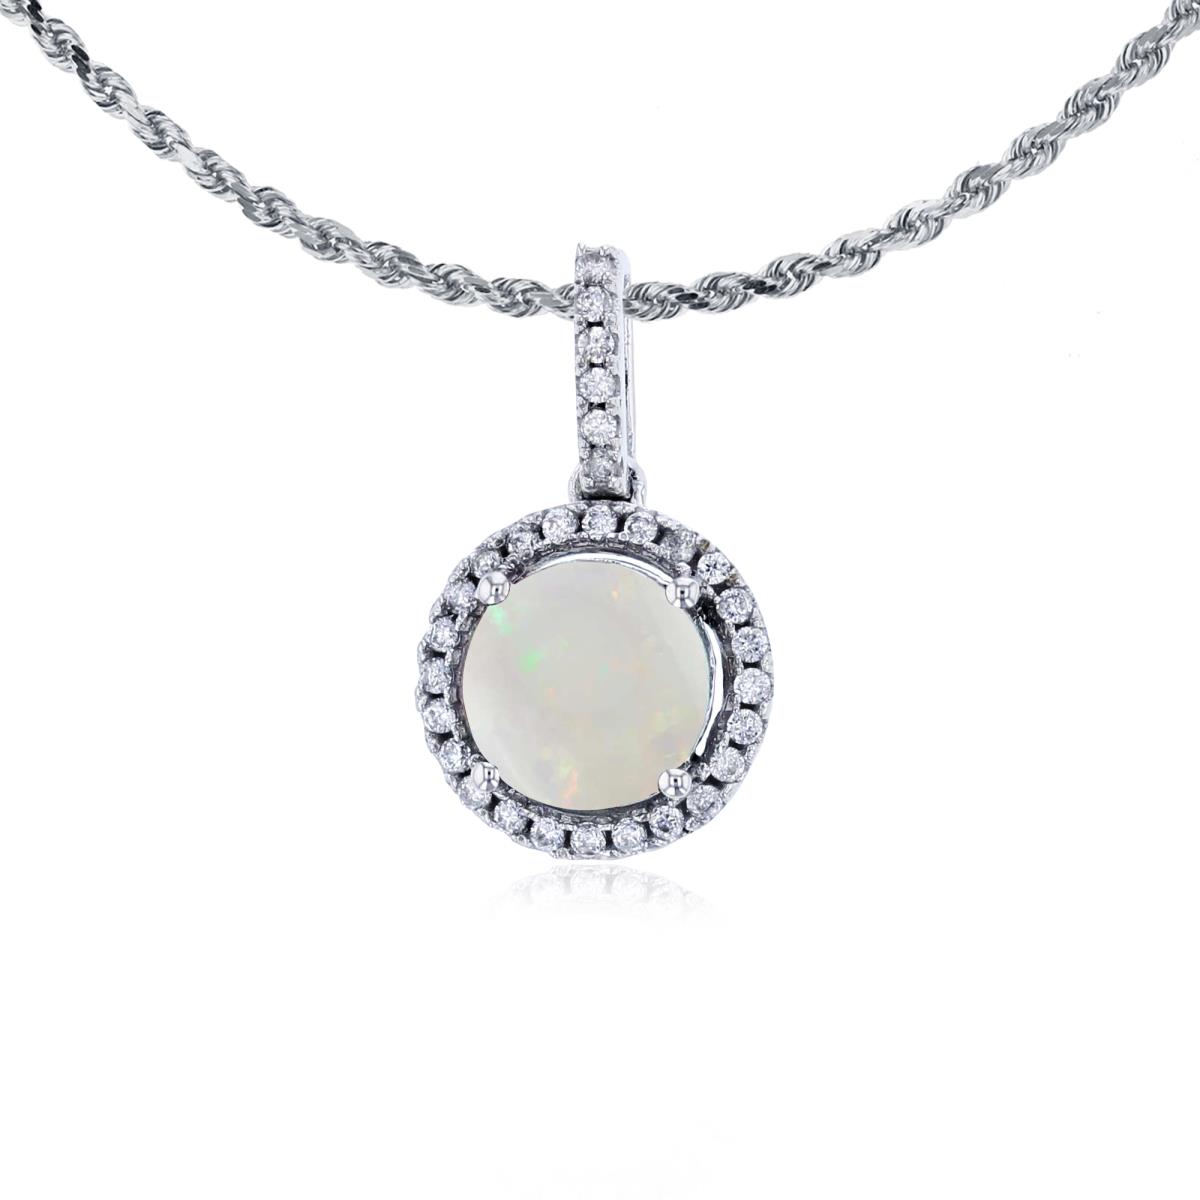 10K White Gold 7mm Round Opal & 0.15 CTTW Round Diamonds Halo 18" Rope Chain Necklace